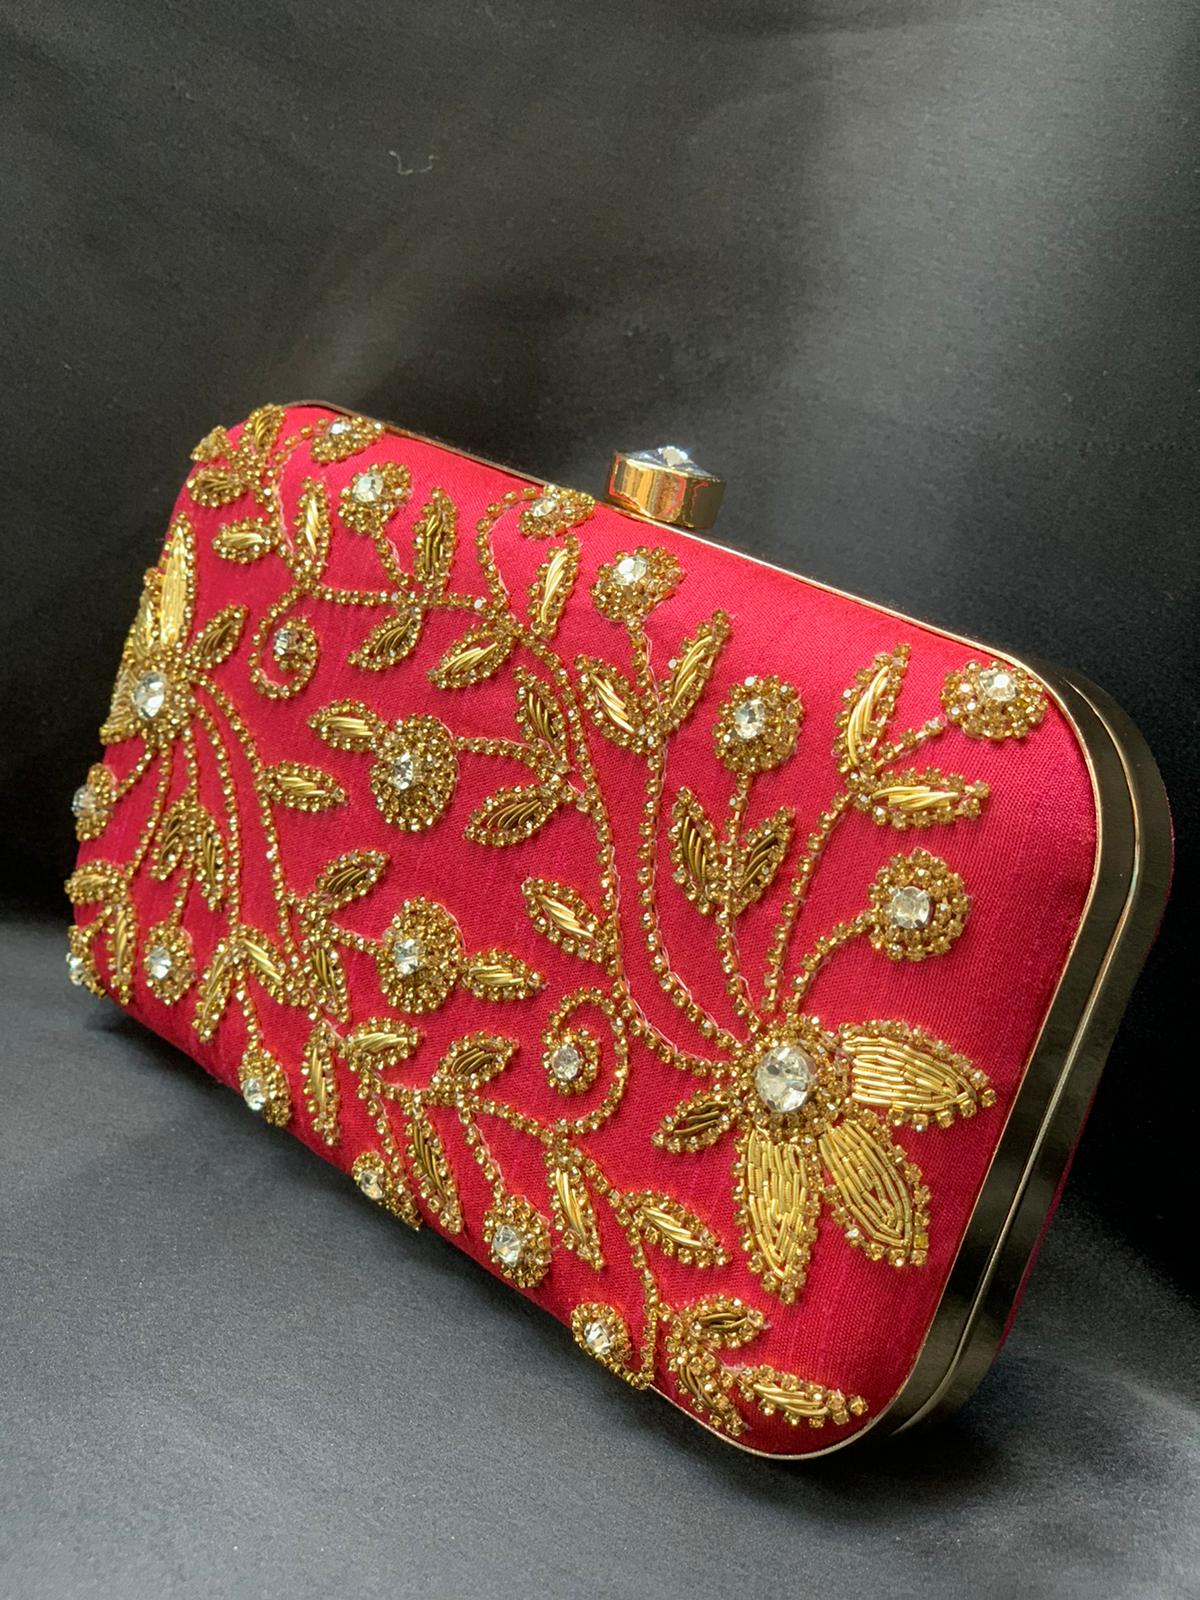 Buy 1960s GOLDEN Fancy Clutch Purse.....glam. Gogo. Princess. Clutch. Bag.  50s 60s Accessories. Mod. Fancy Gold Purse. Shimmer Online in India - Etsy